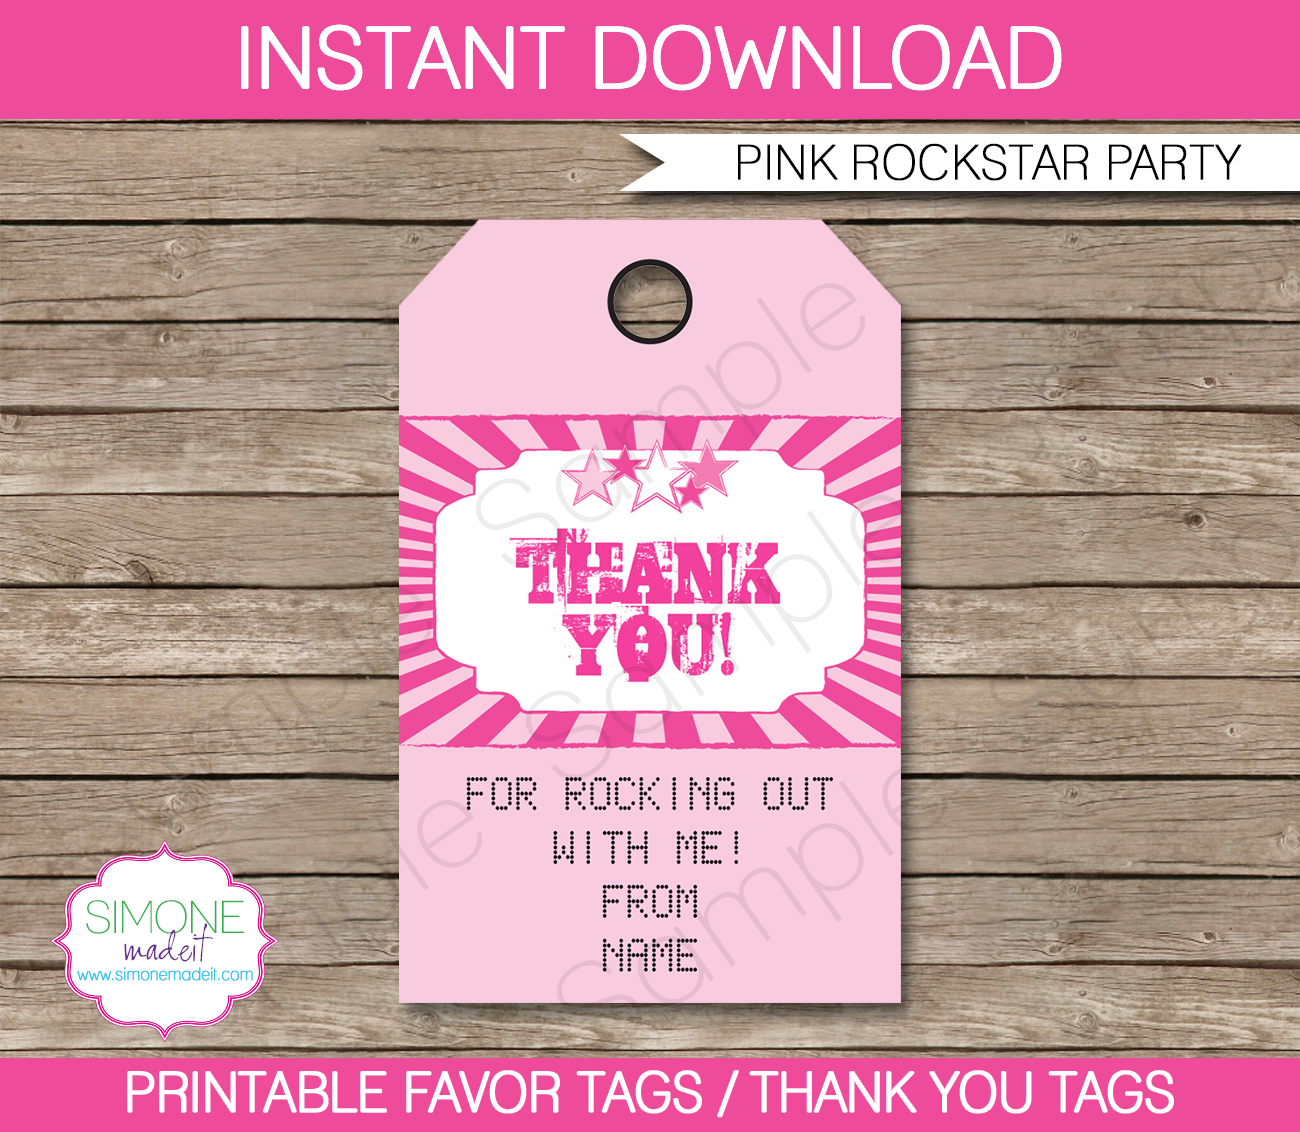 Rockstar Party Favor Tags | Thank You Tags | Birthday Party | Pink | Editable Template